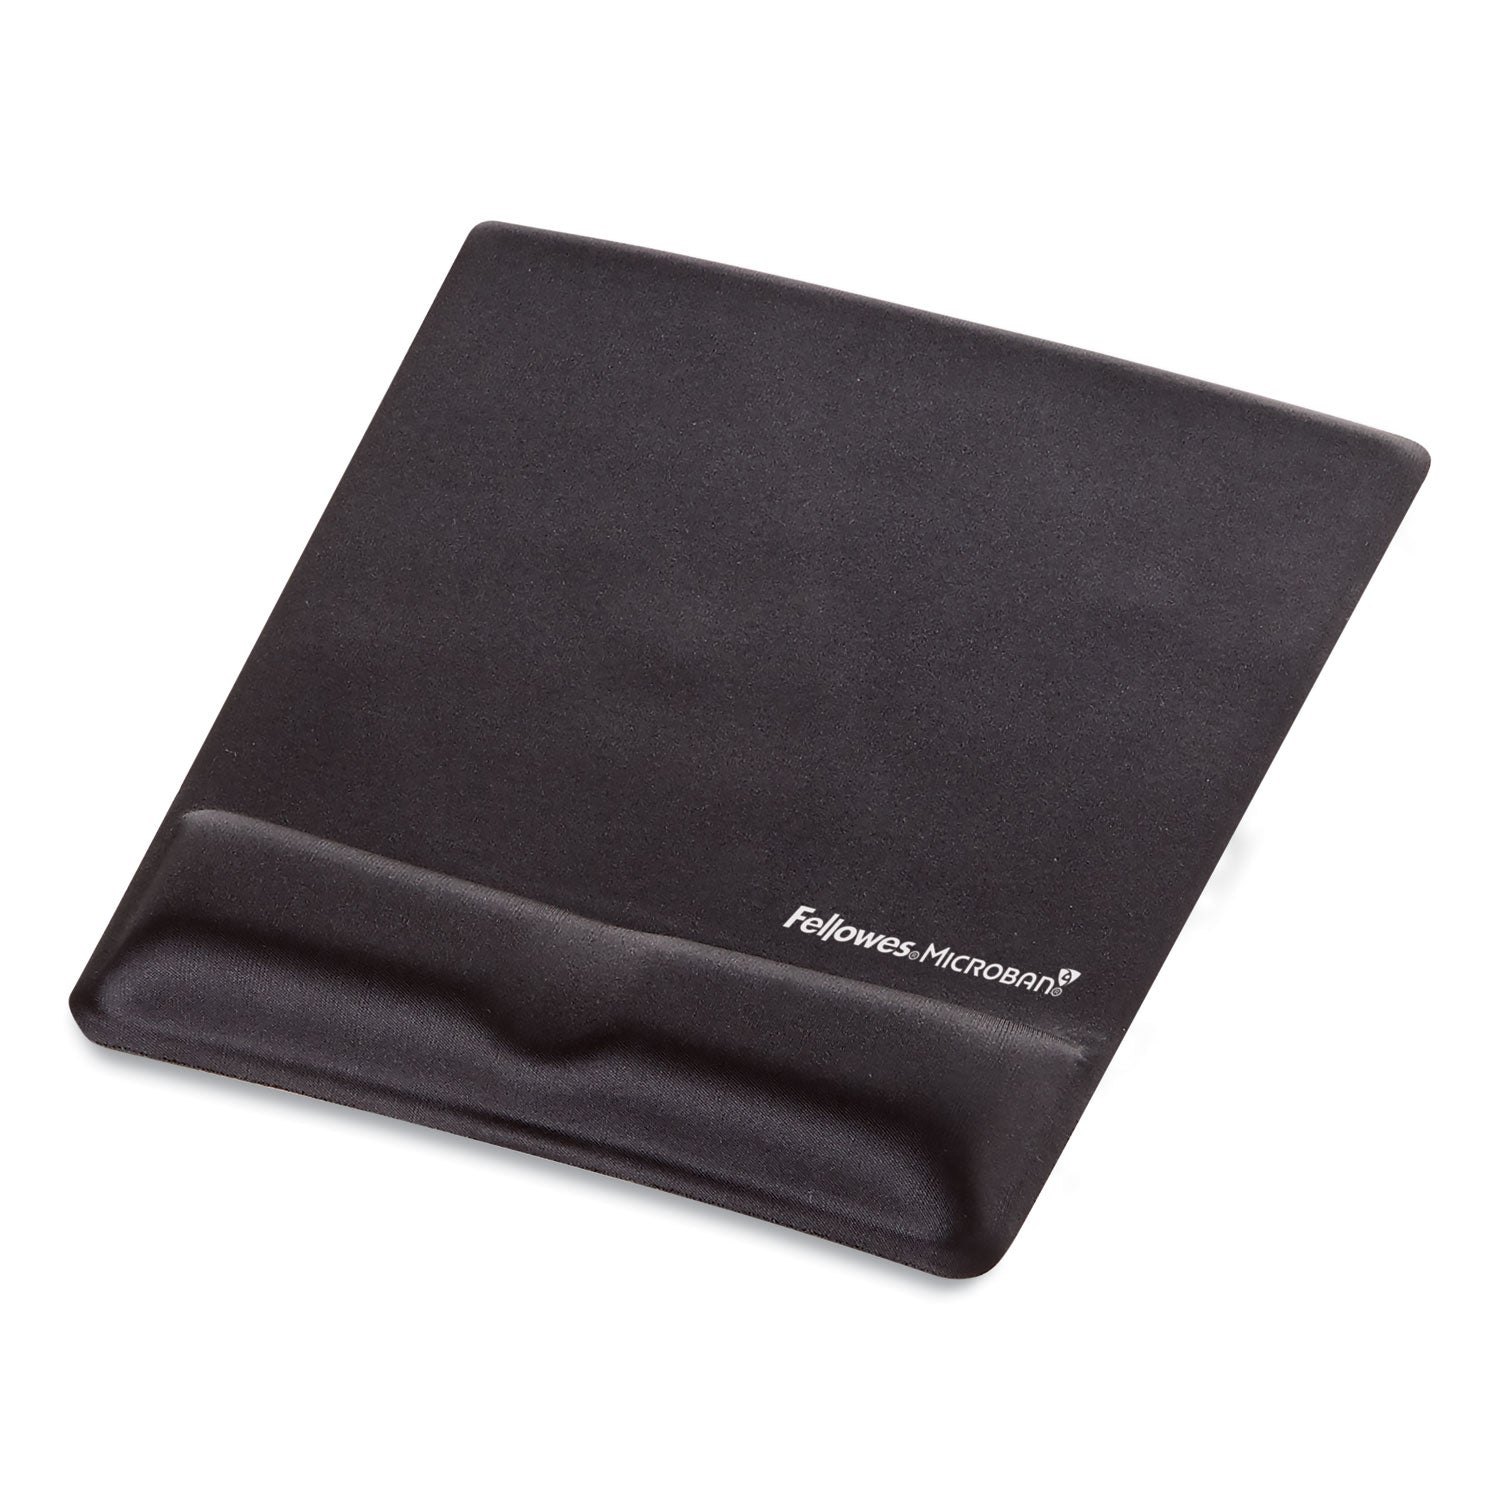 Ergonomic Memory Foam Wrist Support with Attached Mouse Pad, 8.25 x 9.87, Black - 